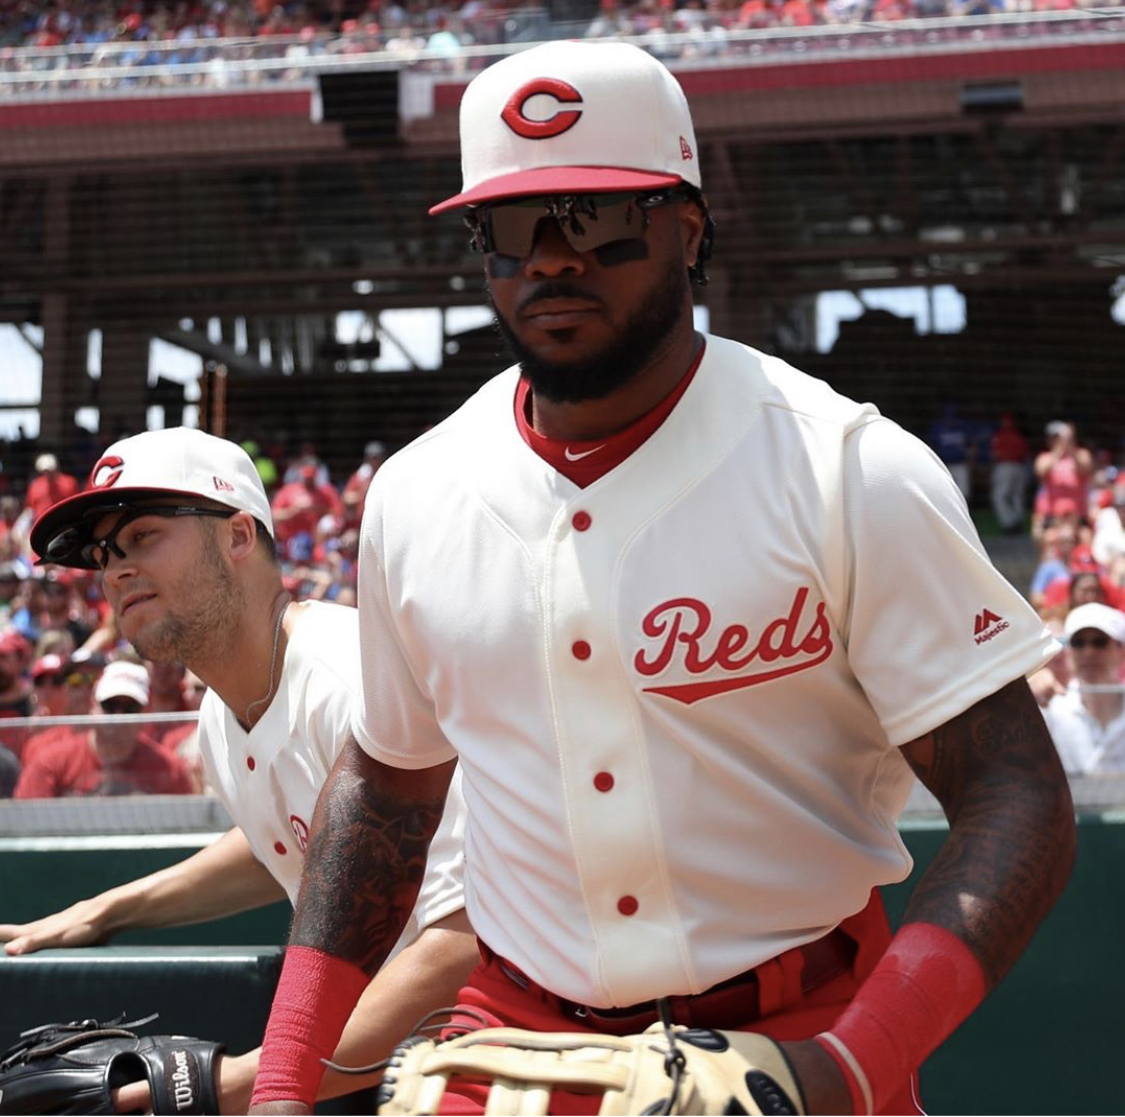 reds jersey throwback